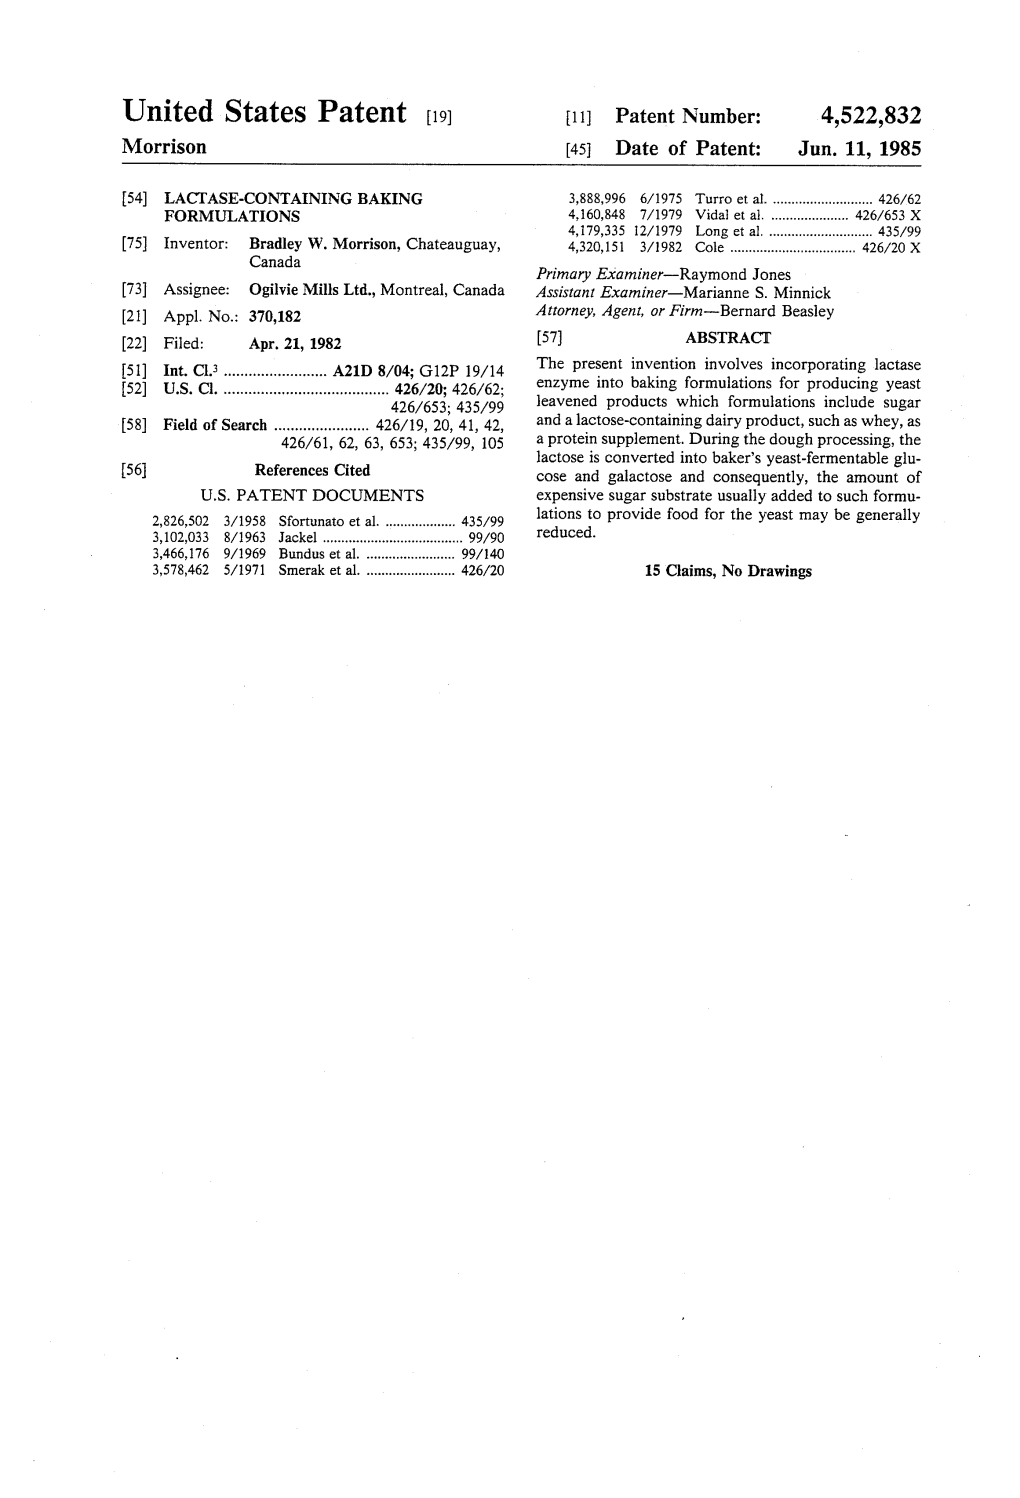 United States Patent (19) 11 Patent Number: 4,522,832 Morrison (45